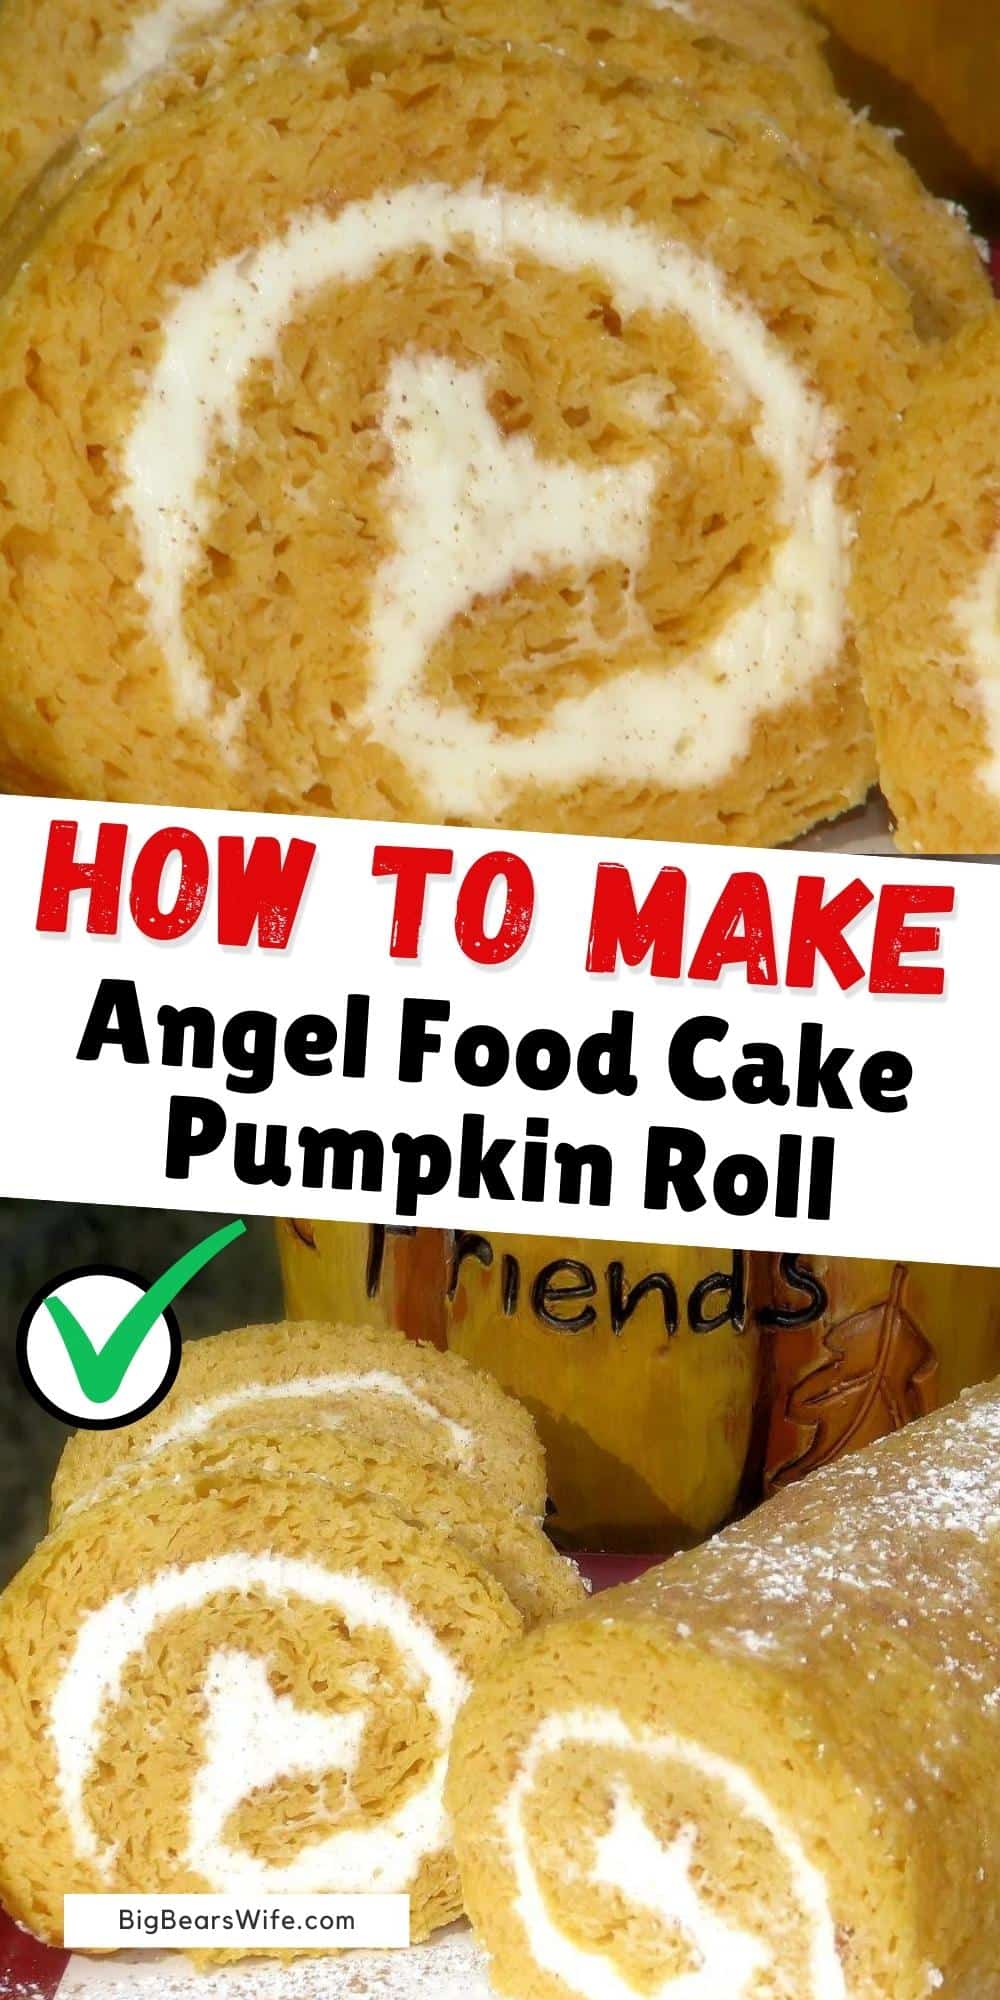  Angel Food Cake Pumpkin Roll - A super simple dessert made of Angel Food Cake and Pumpkin Puree mixed together and rolled with cheesecake filling in the middle! via @bigbearswife